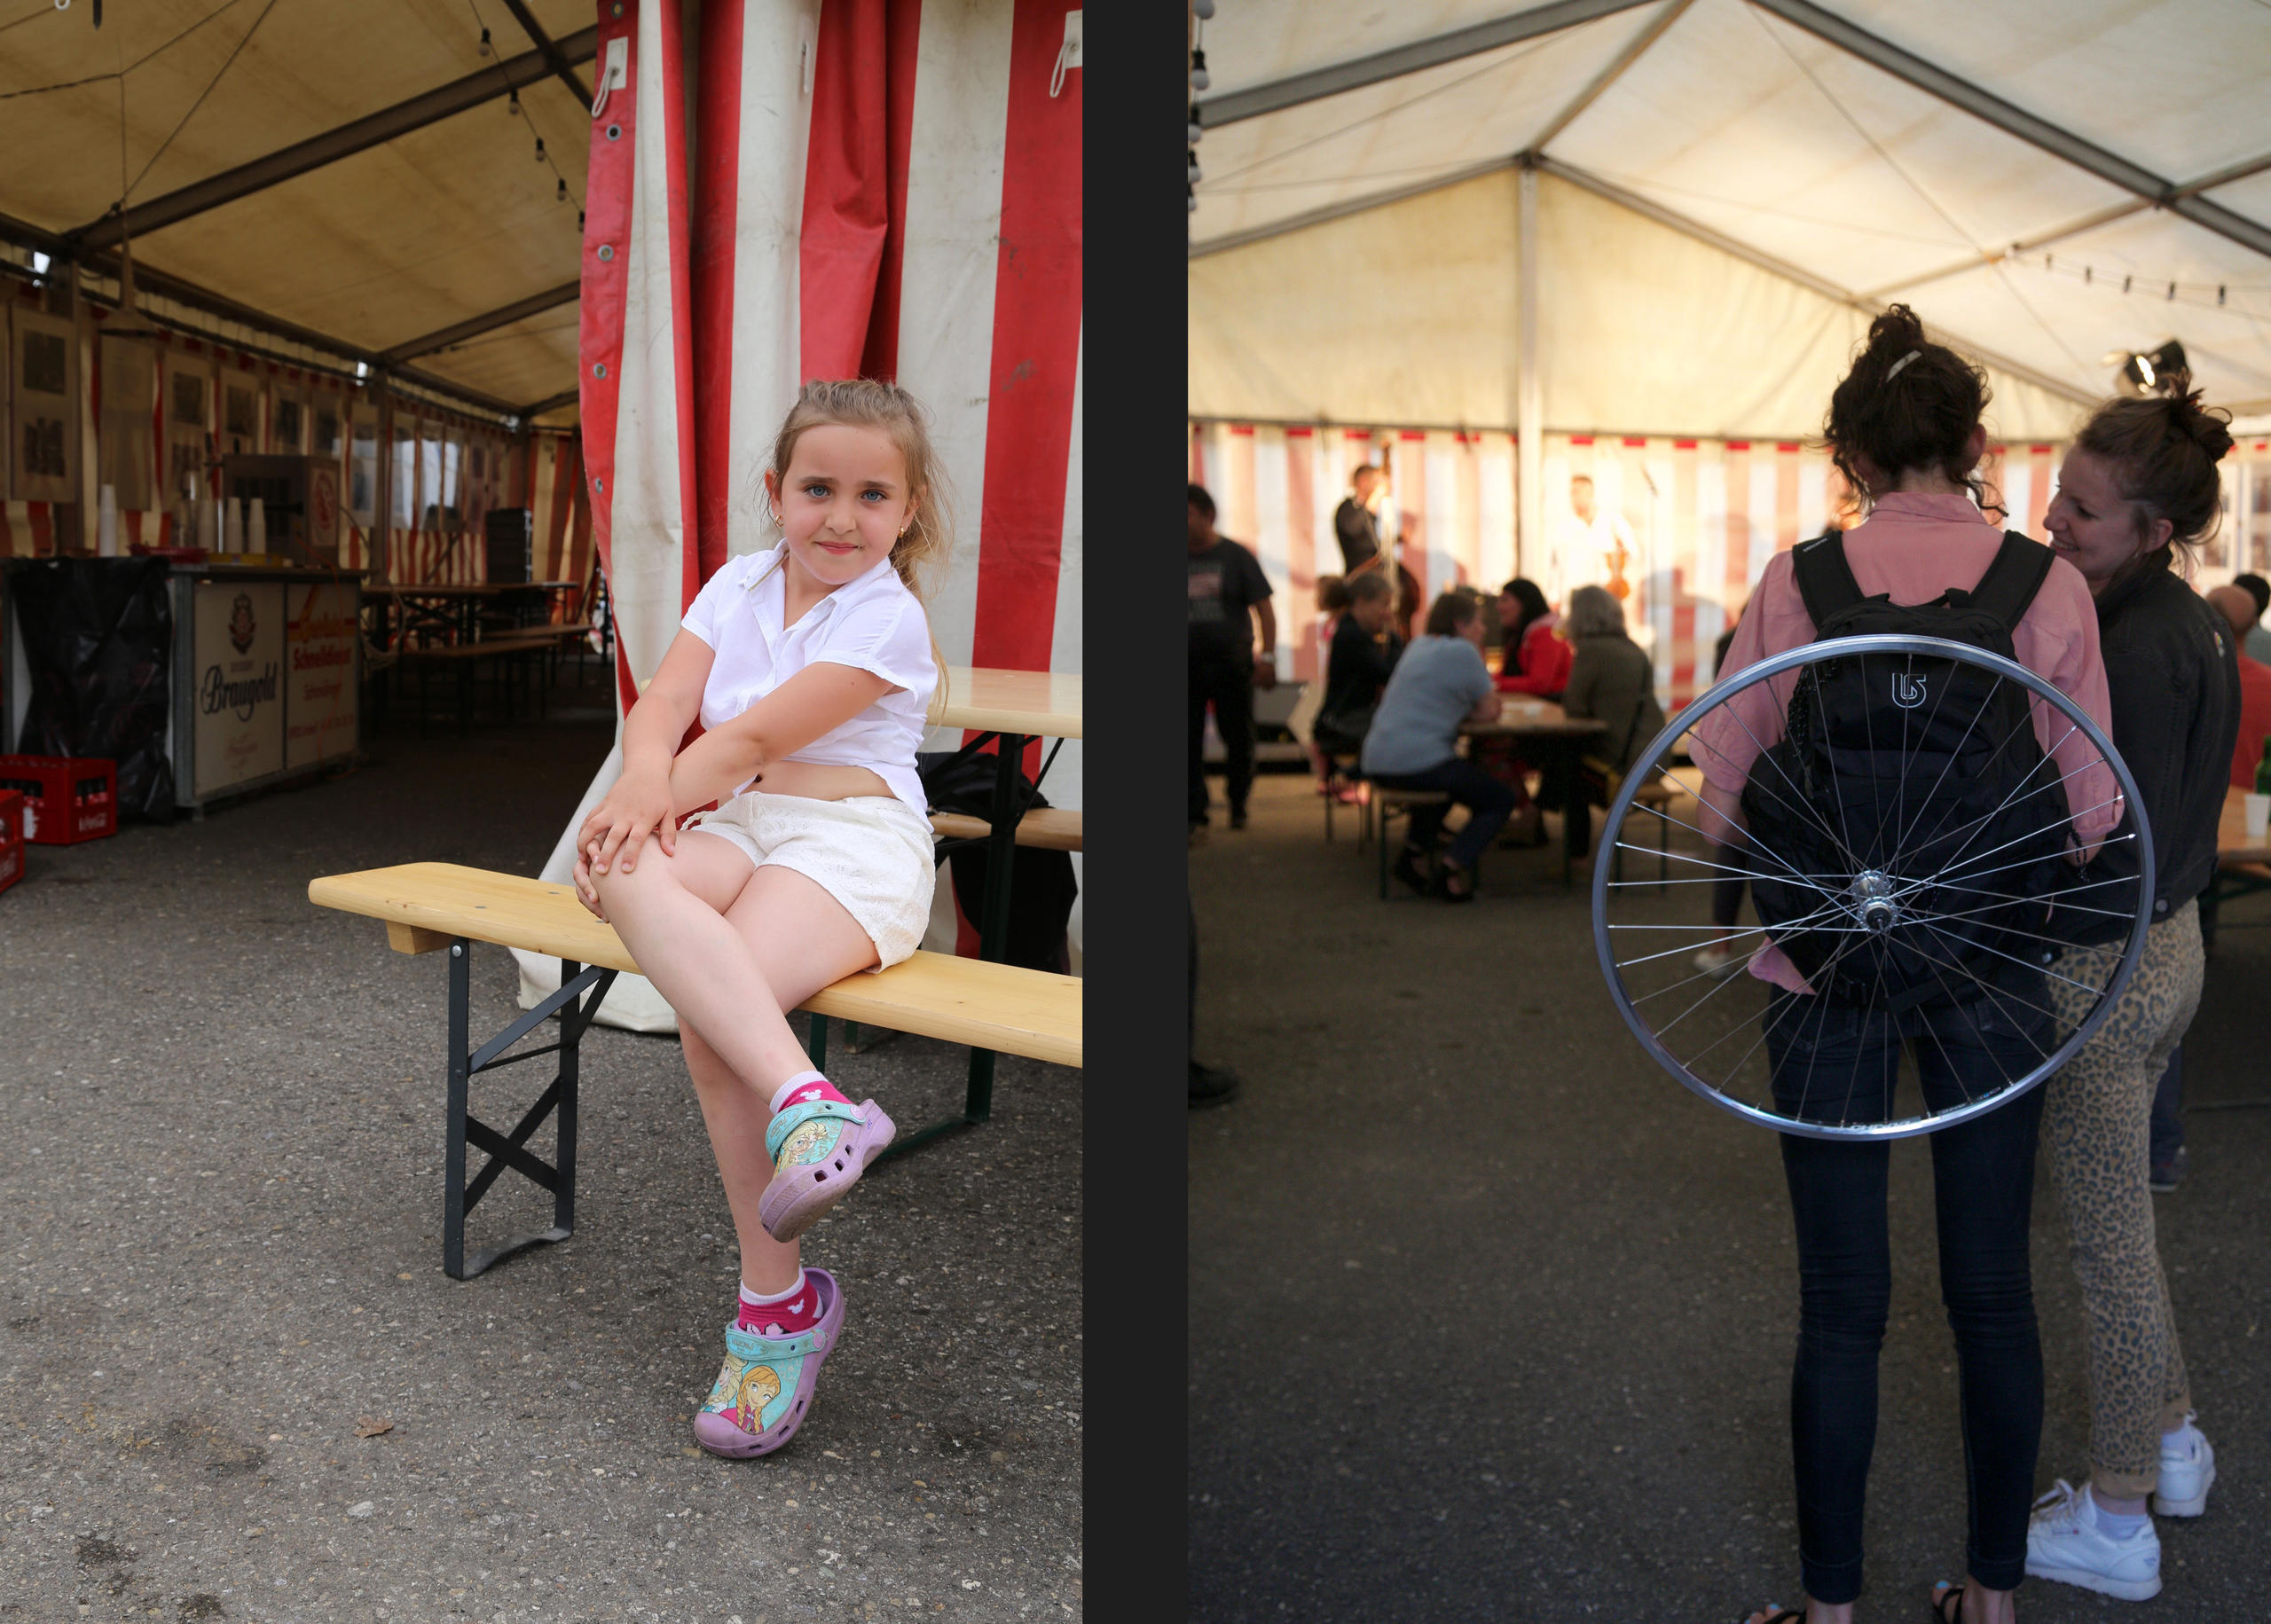 A young girl siting and posed on a bench looking to the camera and the backs of 2 women standing in a party tent.